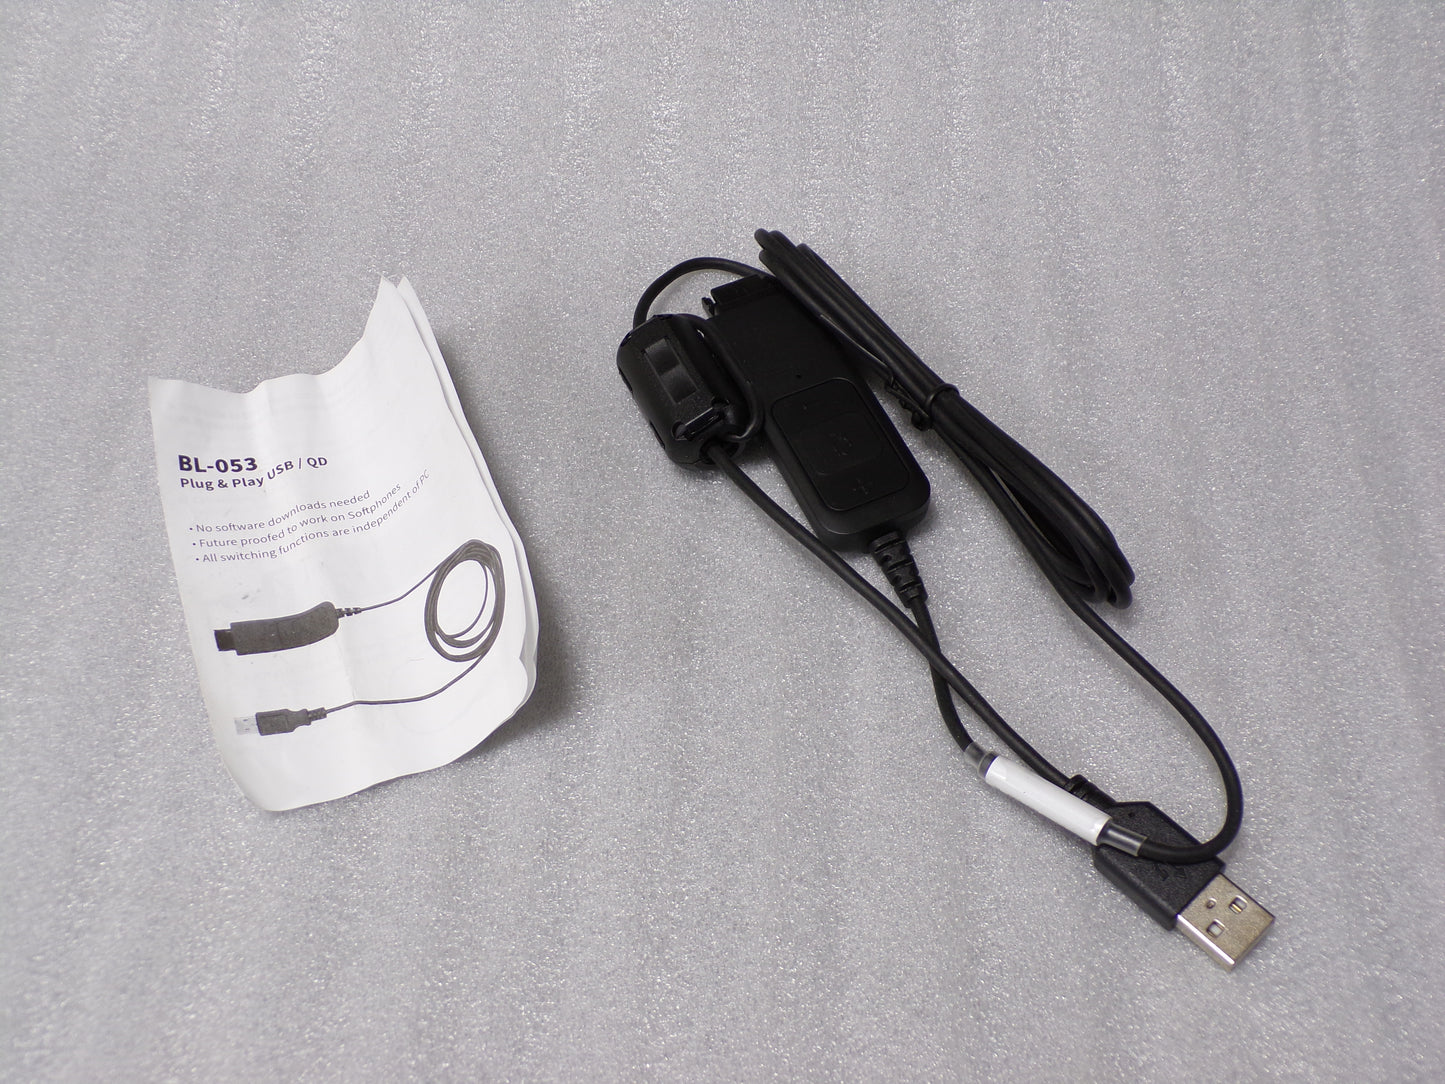 JPL USB/Jabra GN Quick Disconnect Bottom Lead Cable With Universal Connection Lead Black BL-053+GN (CR00614-WTA15)